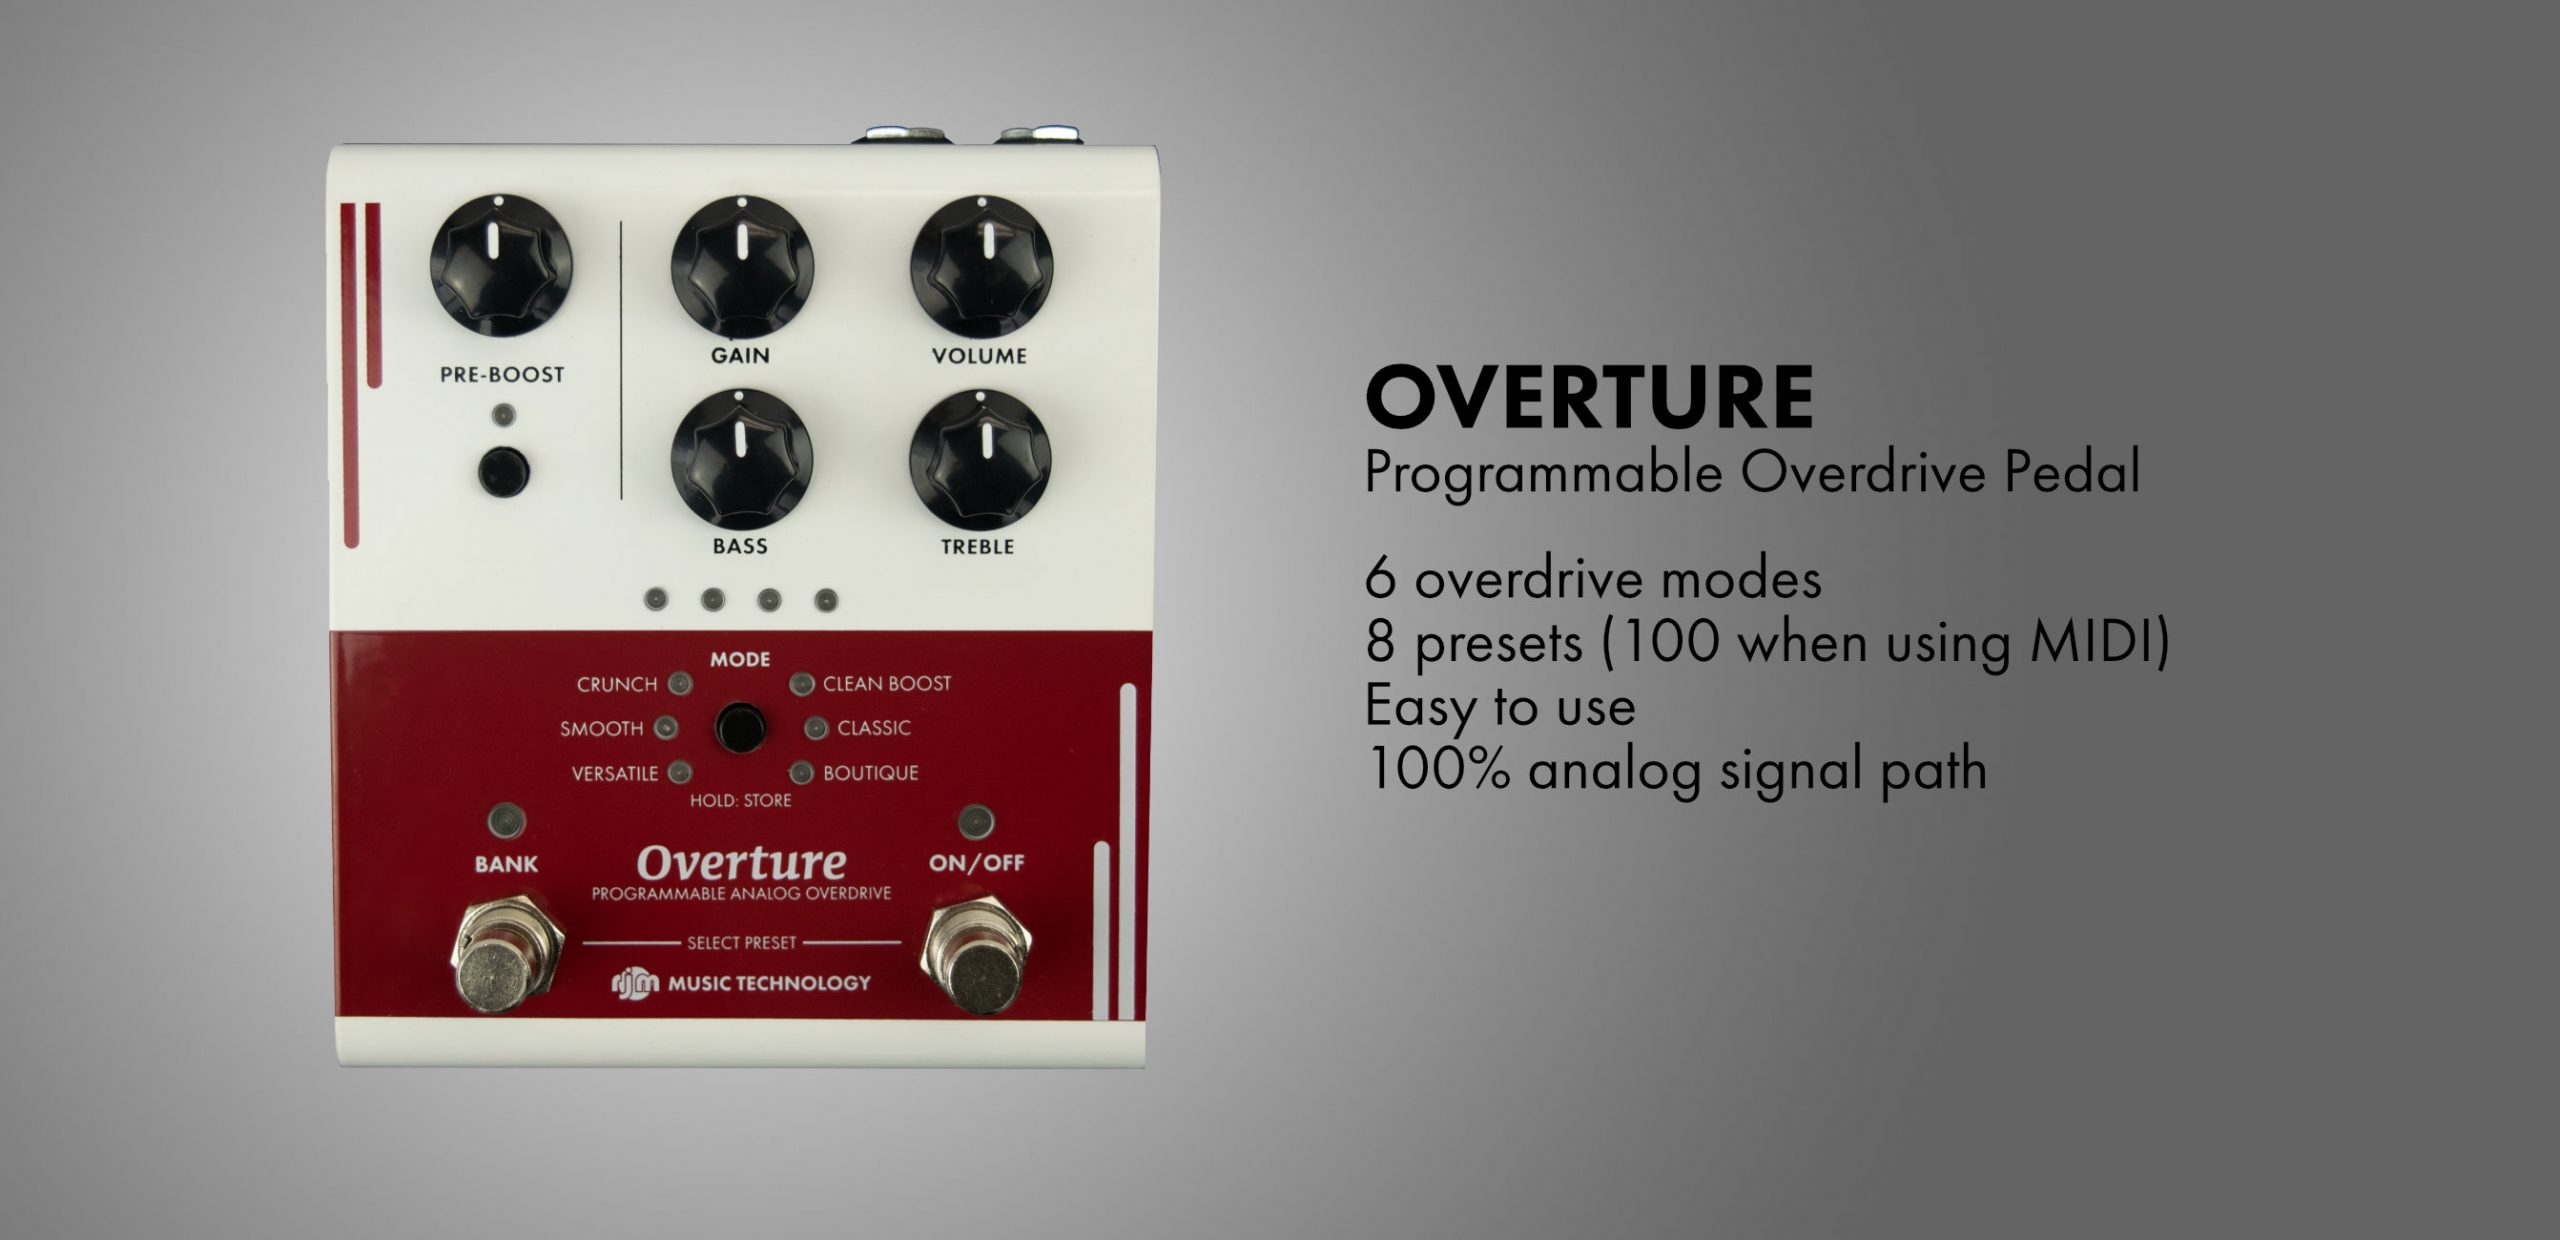 Overture Programmable Analog Overdrive Pedal